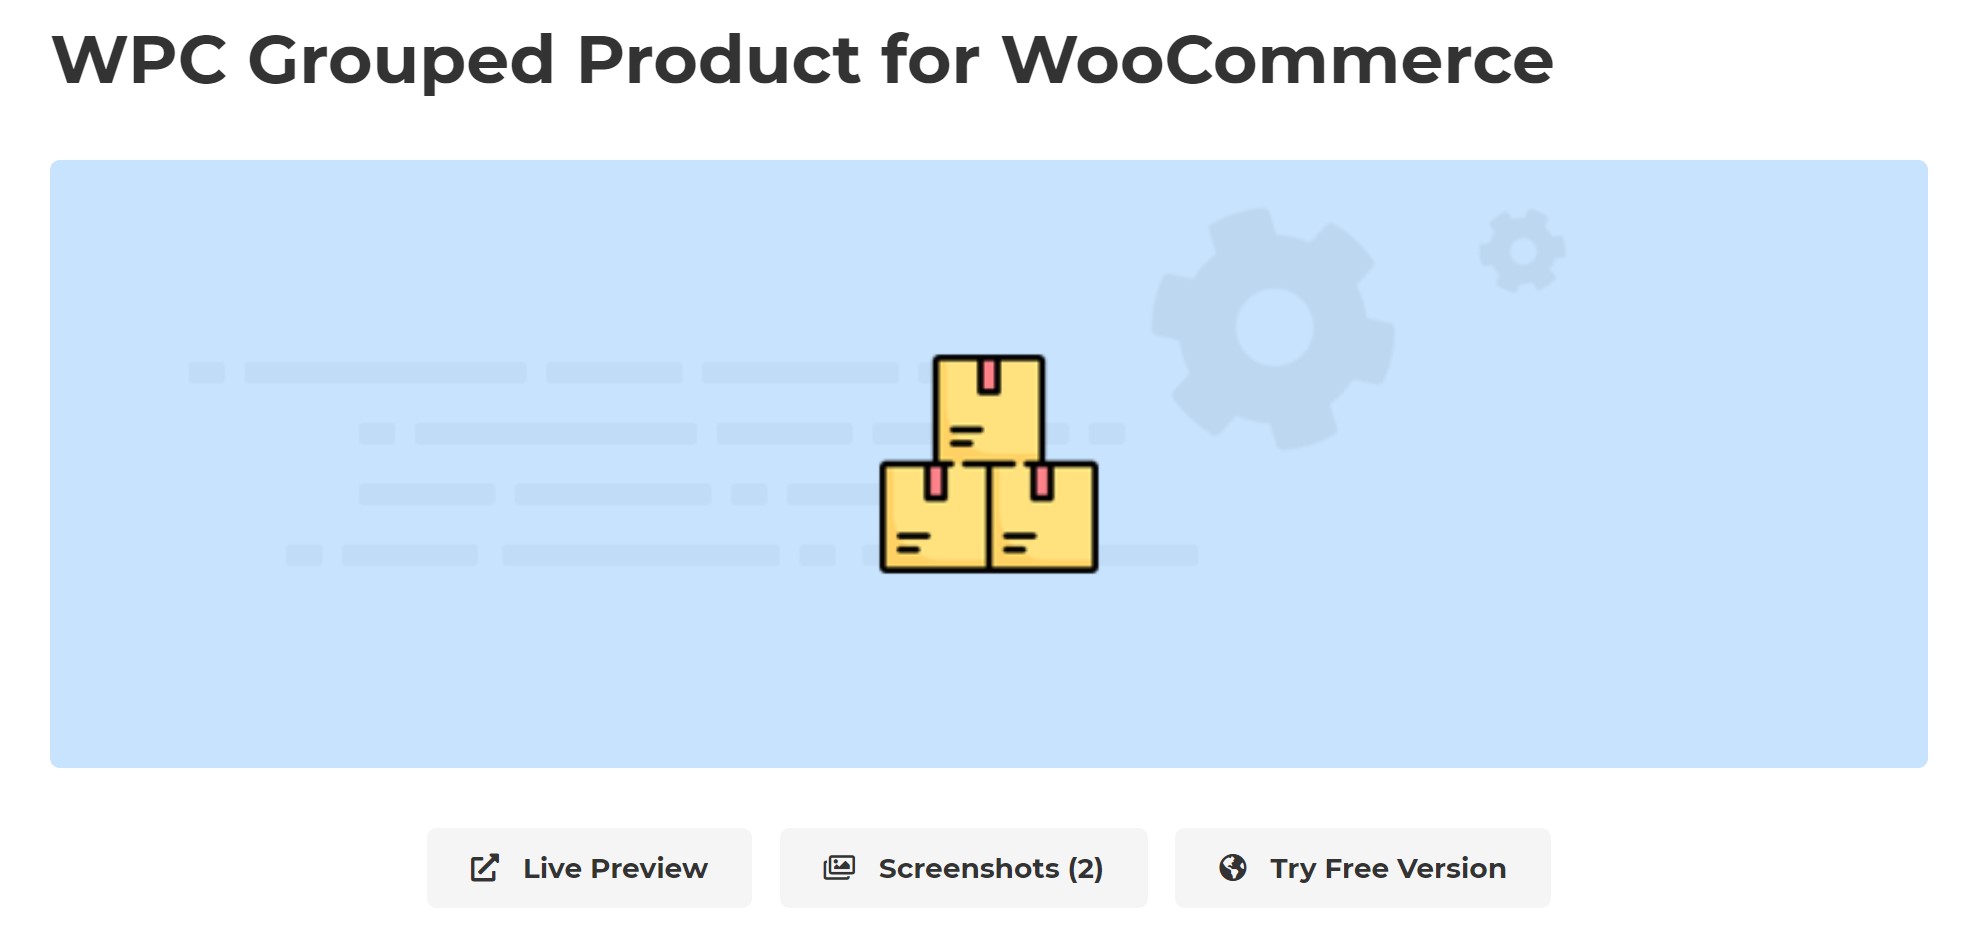 WPC Grouped Product for WooCommerce Pro 3.1.1